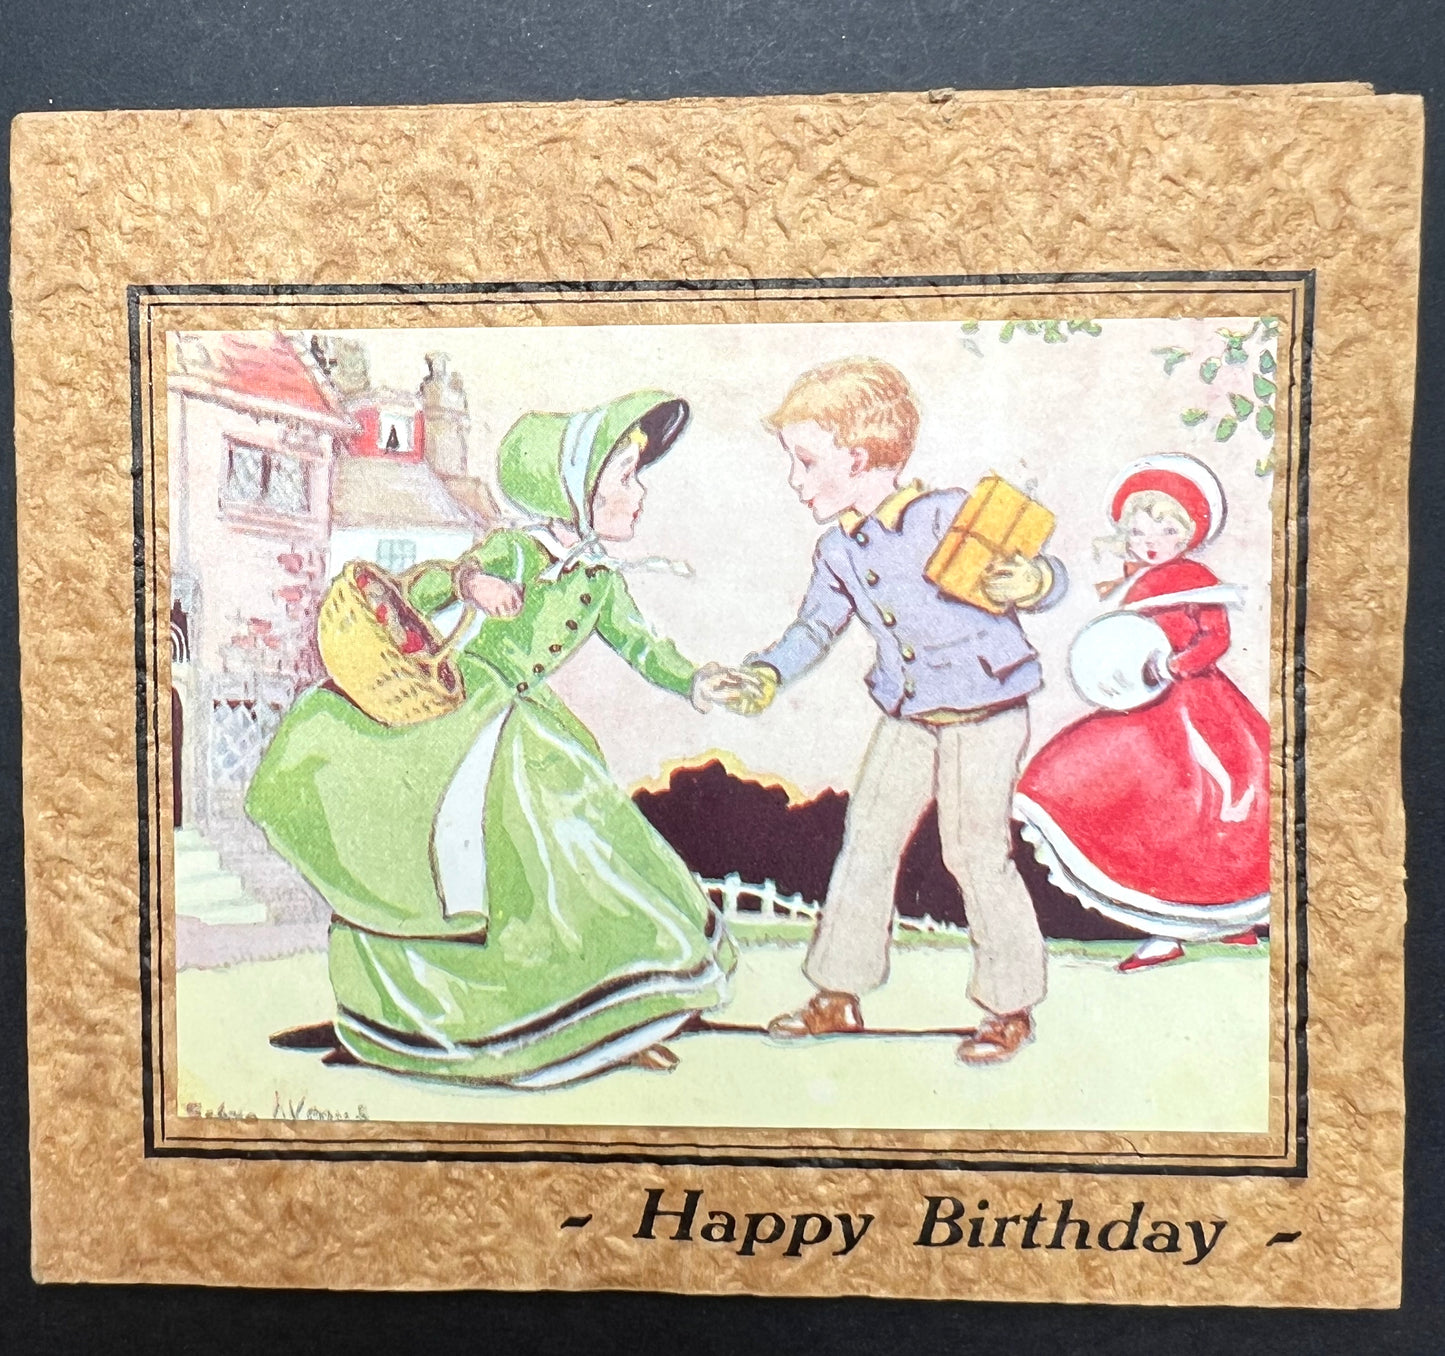 The Most Polite of Encounters on 1940s Birthday Card